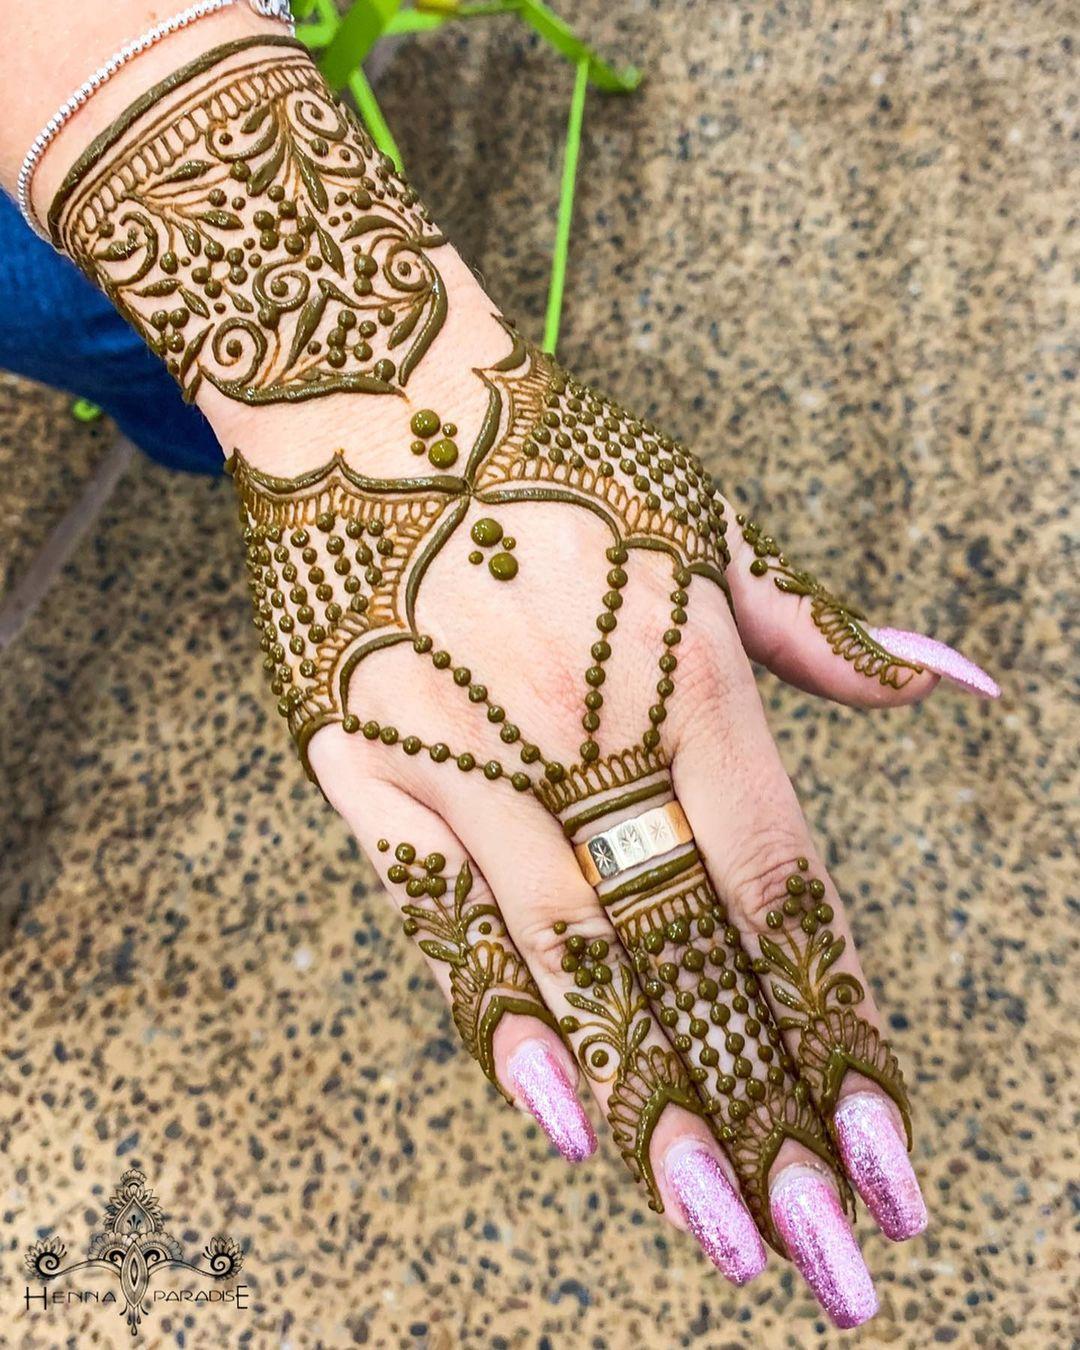 50 Finger Mehndi Design For All Occasions Weddingwire